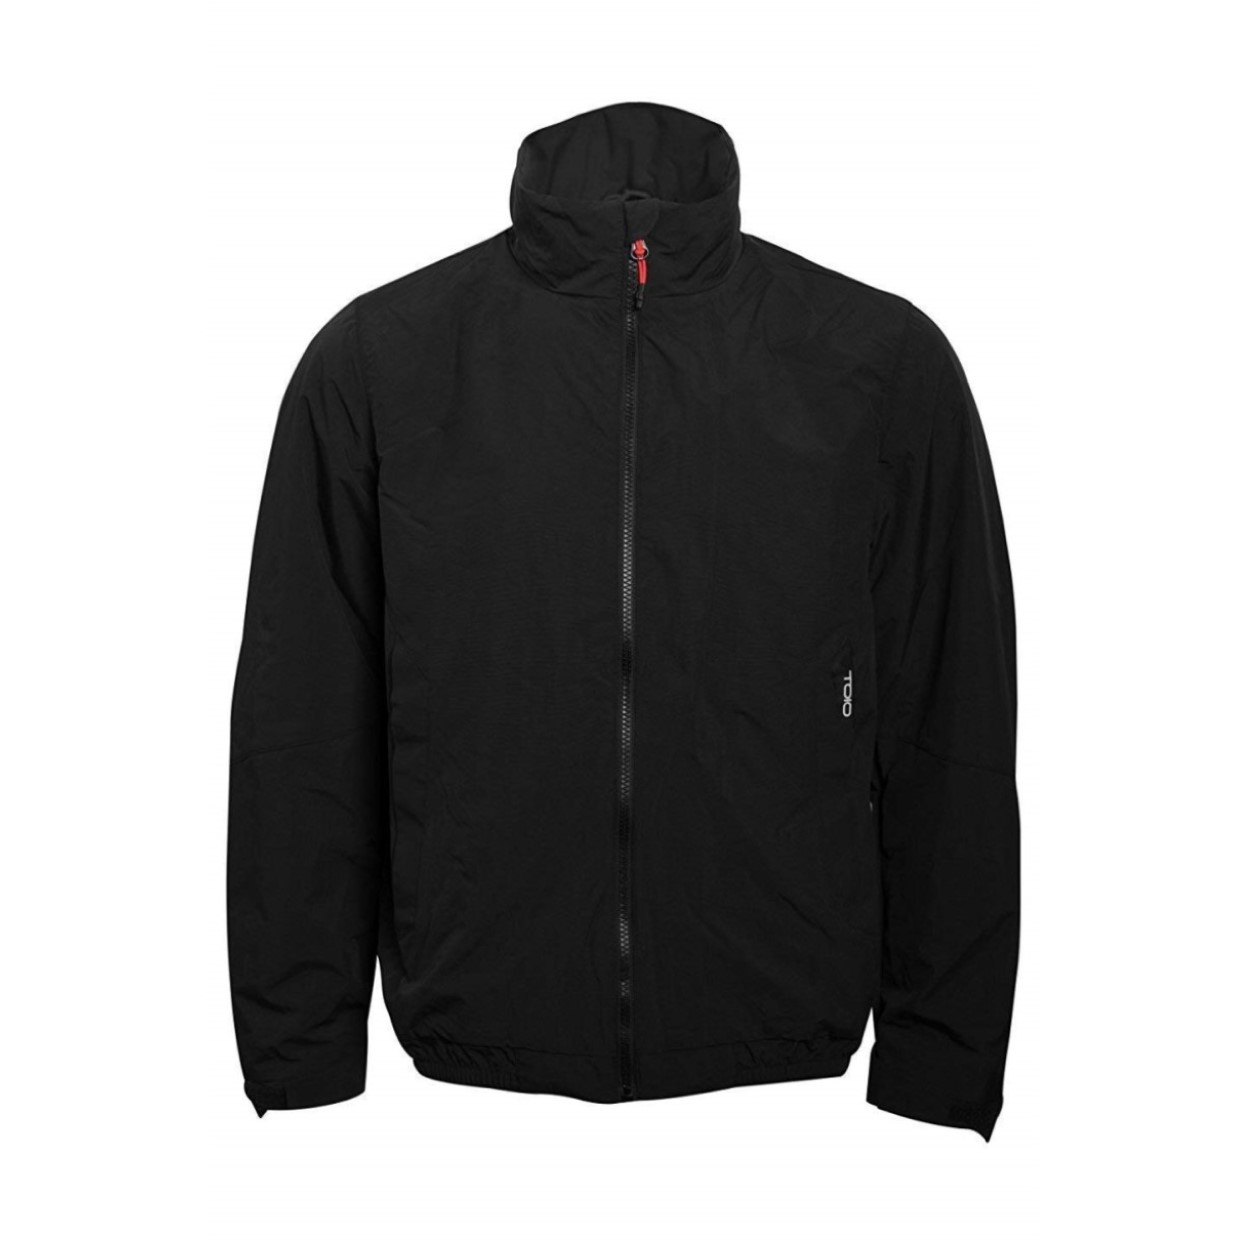 TOIO Cowes | Team Jacket at £129.00